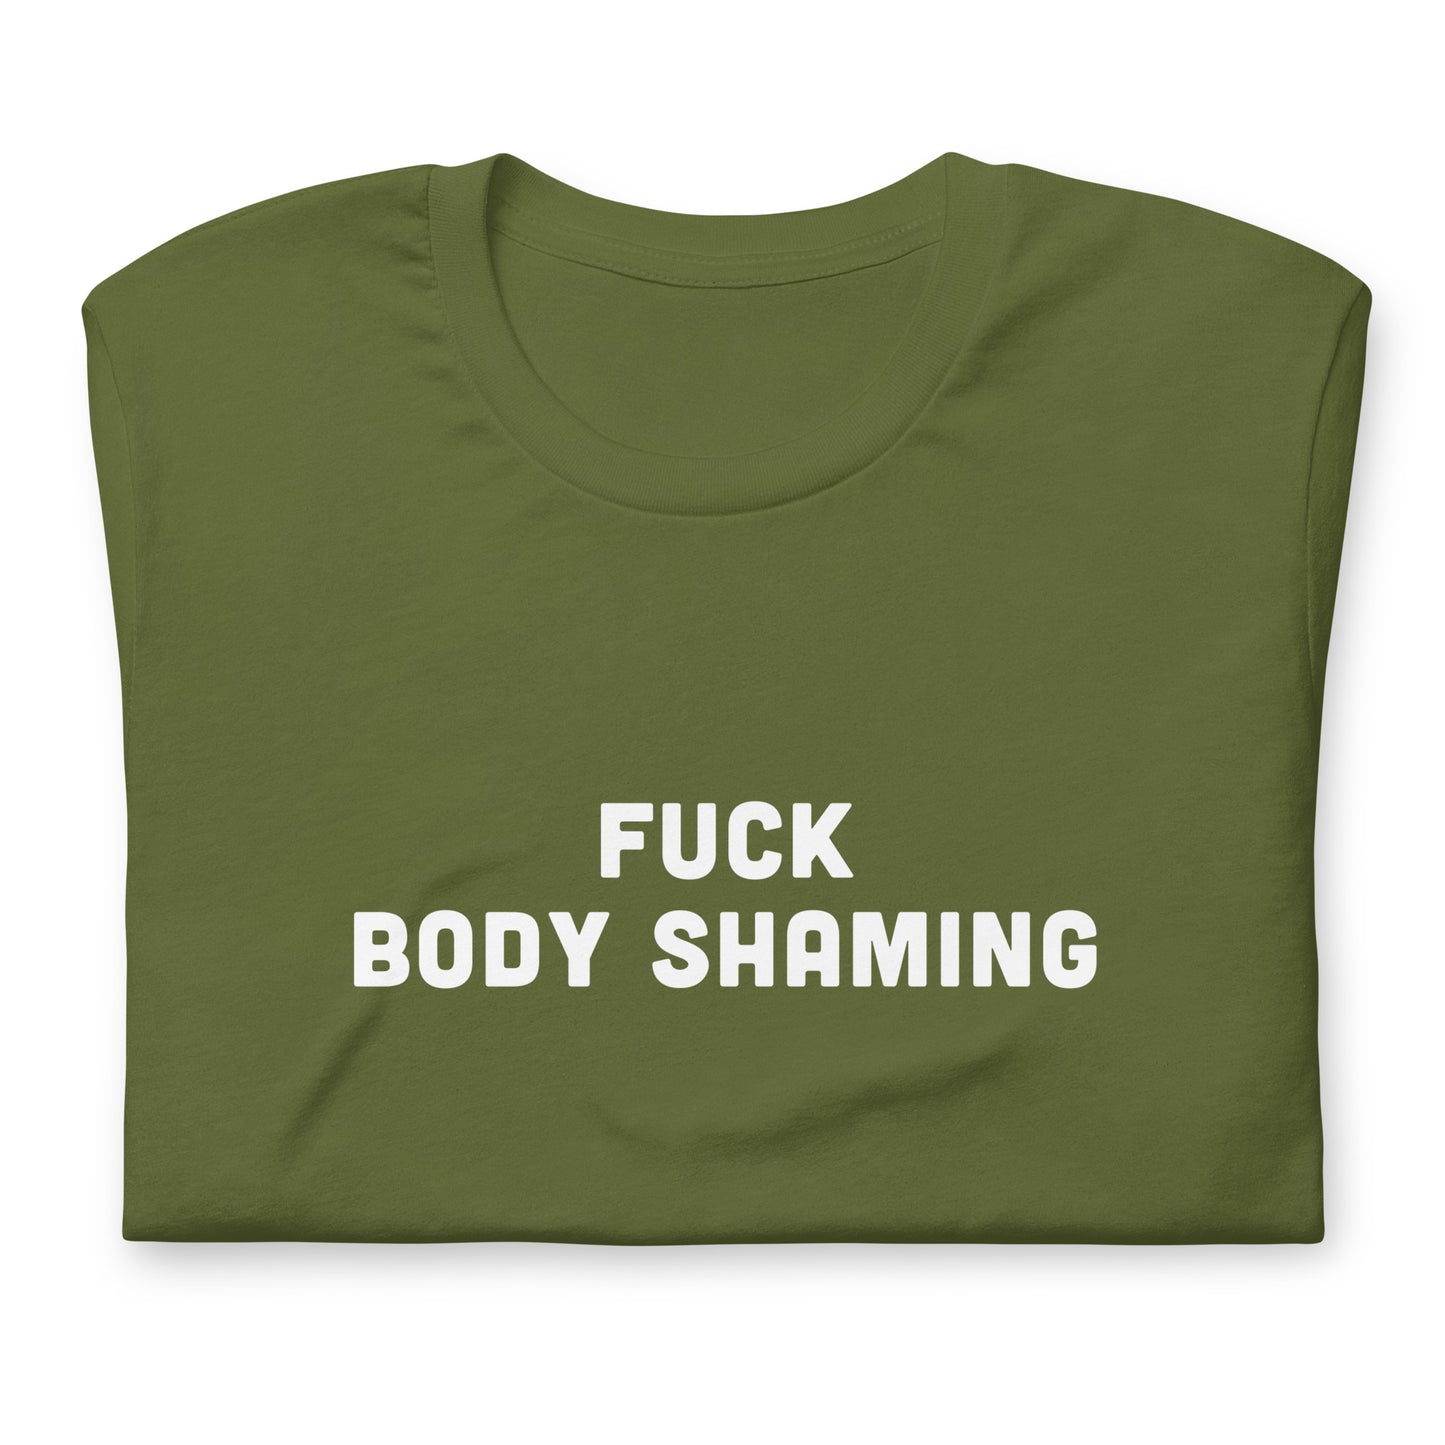 Fuck Body Shaming T-shirt Size S Color Navy